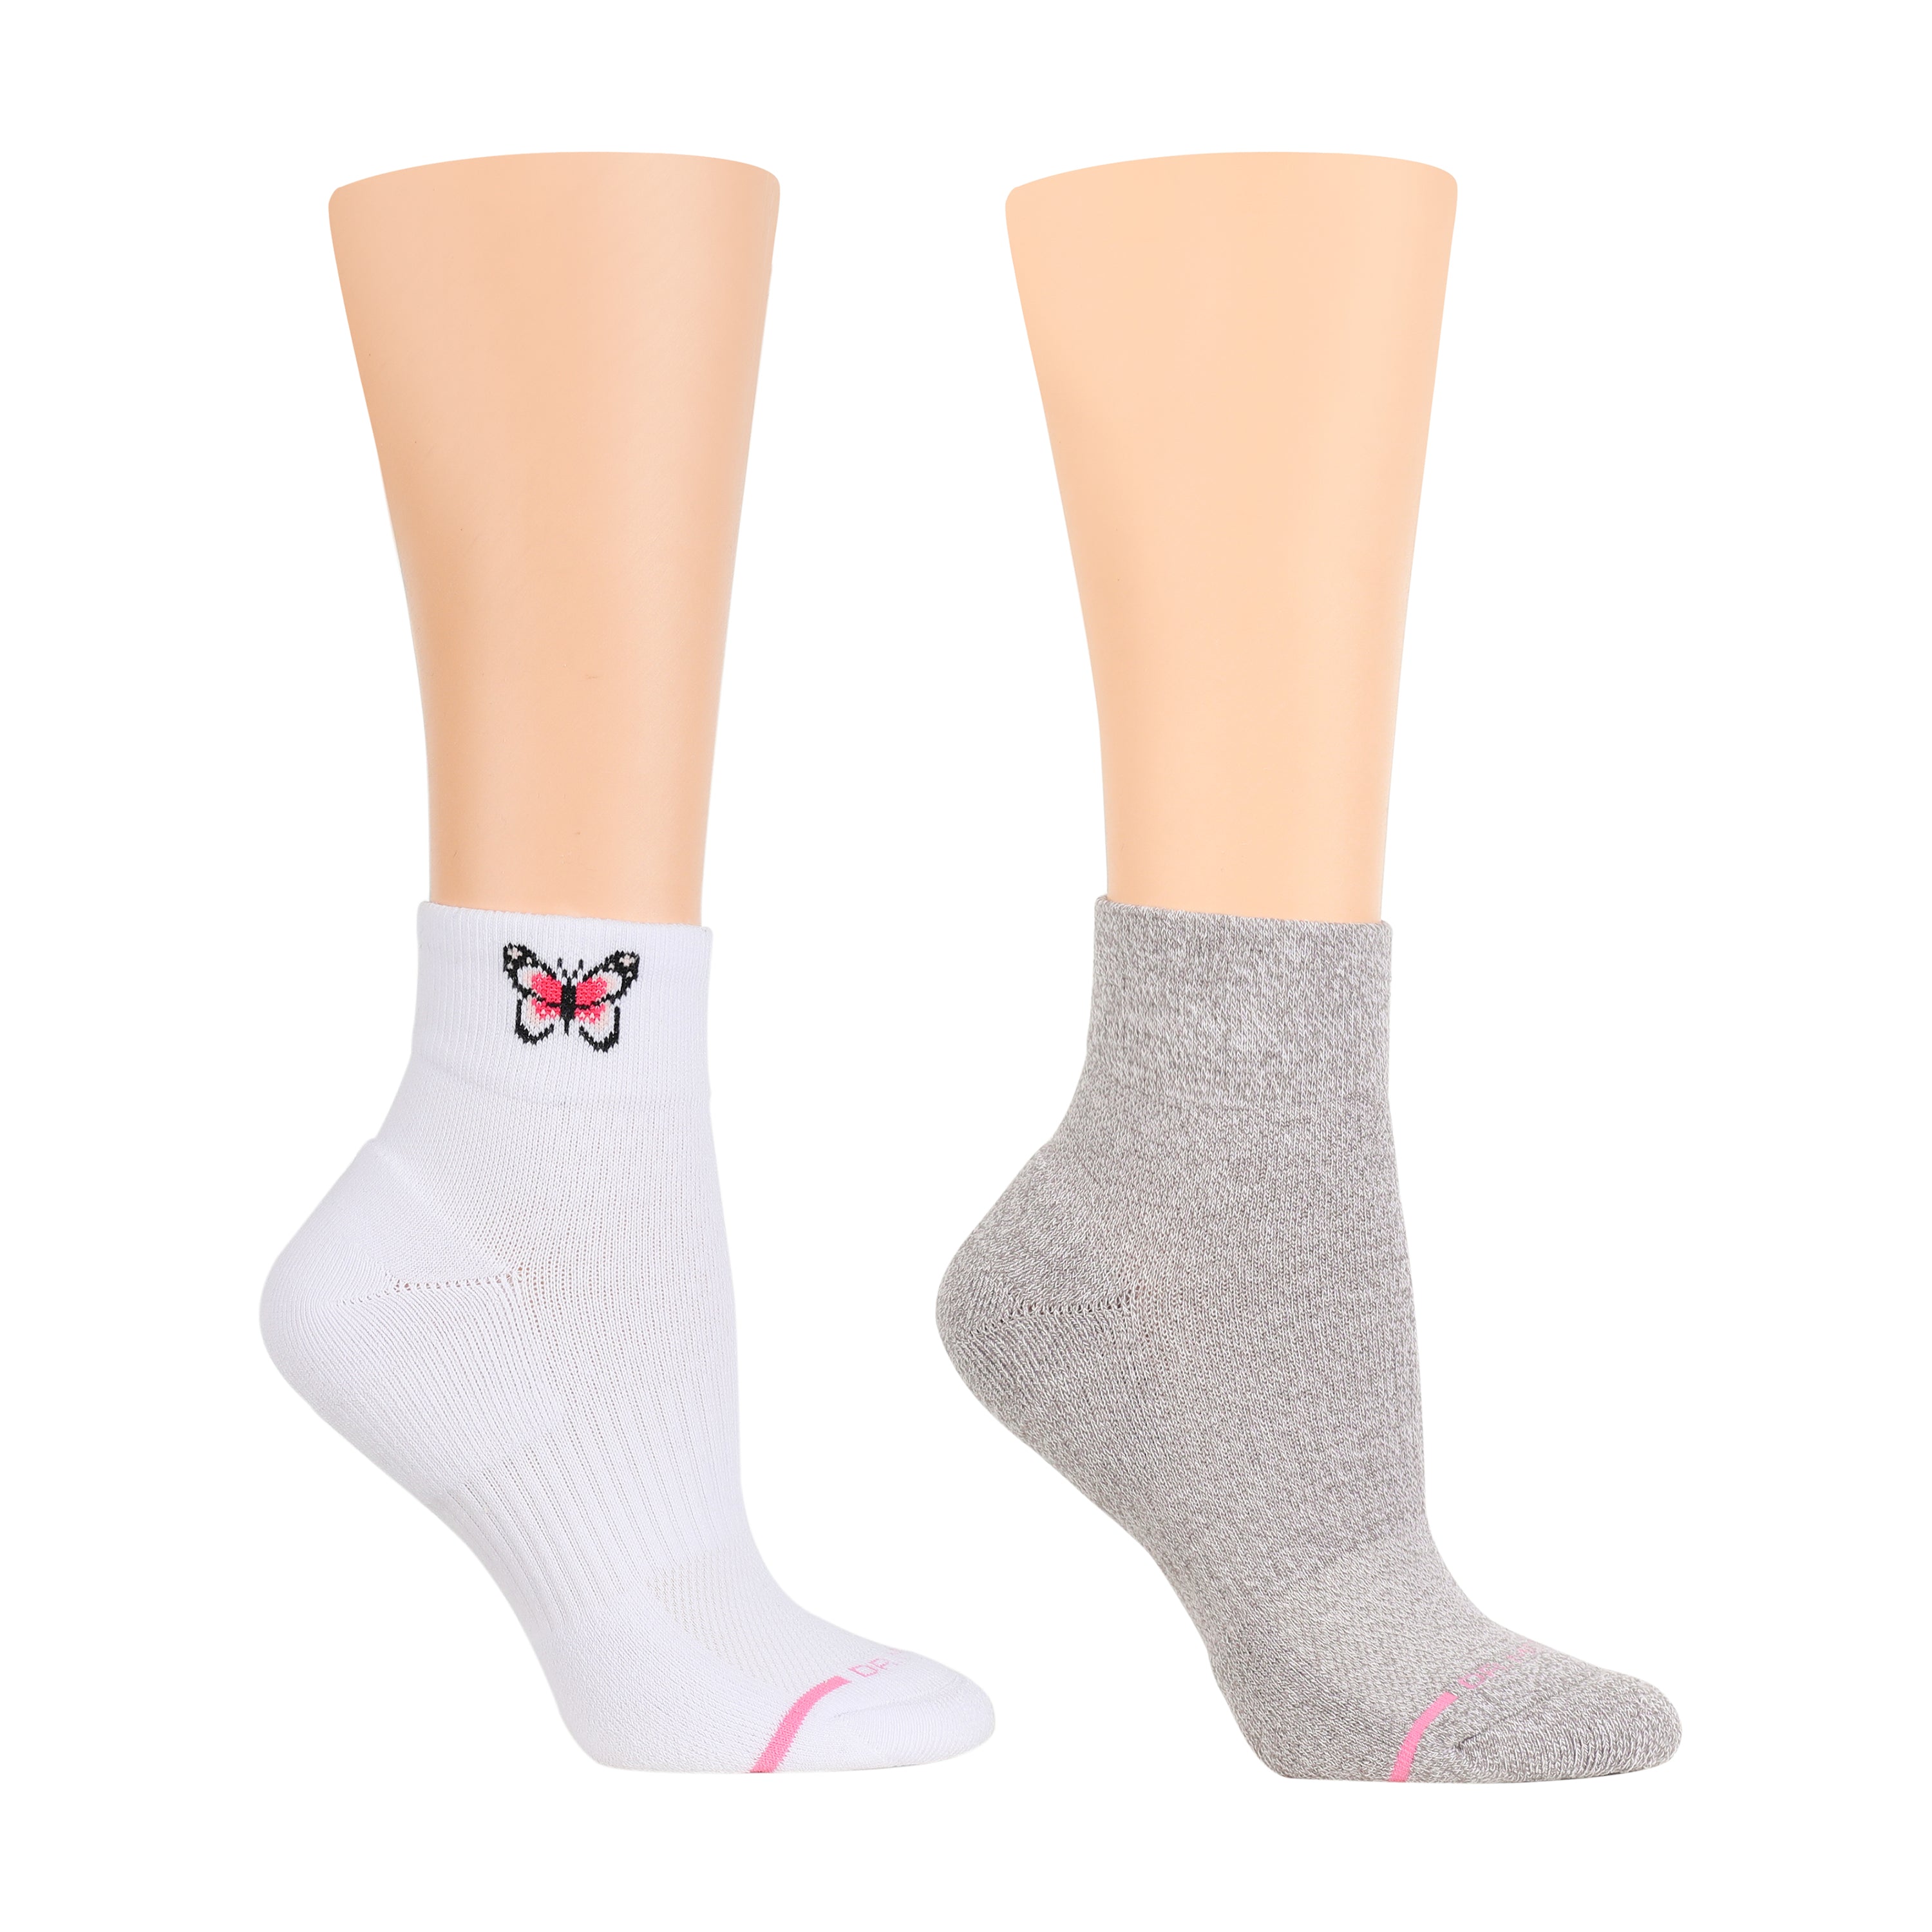 Placed Butterfly | Quarter Compression Socks For Women